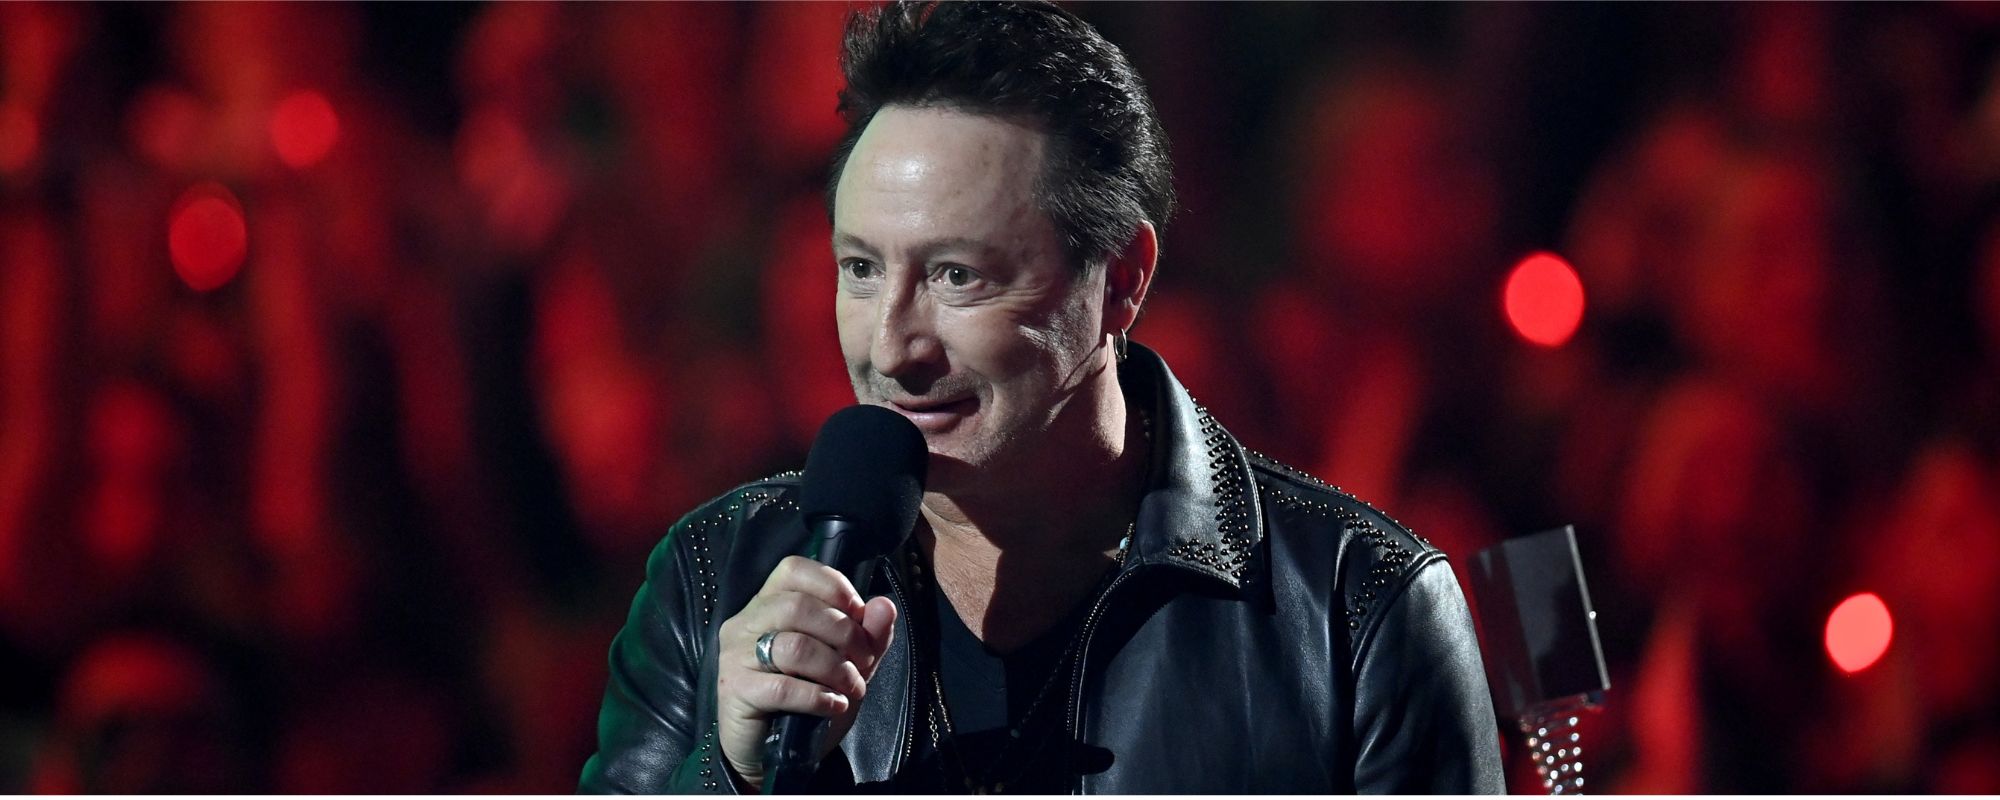 Julian Lennon Talks His “Love-Hate” Experience with “Hey Jude”